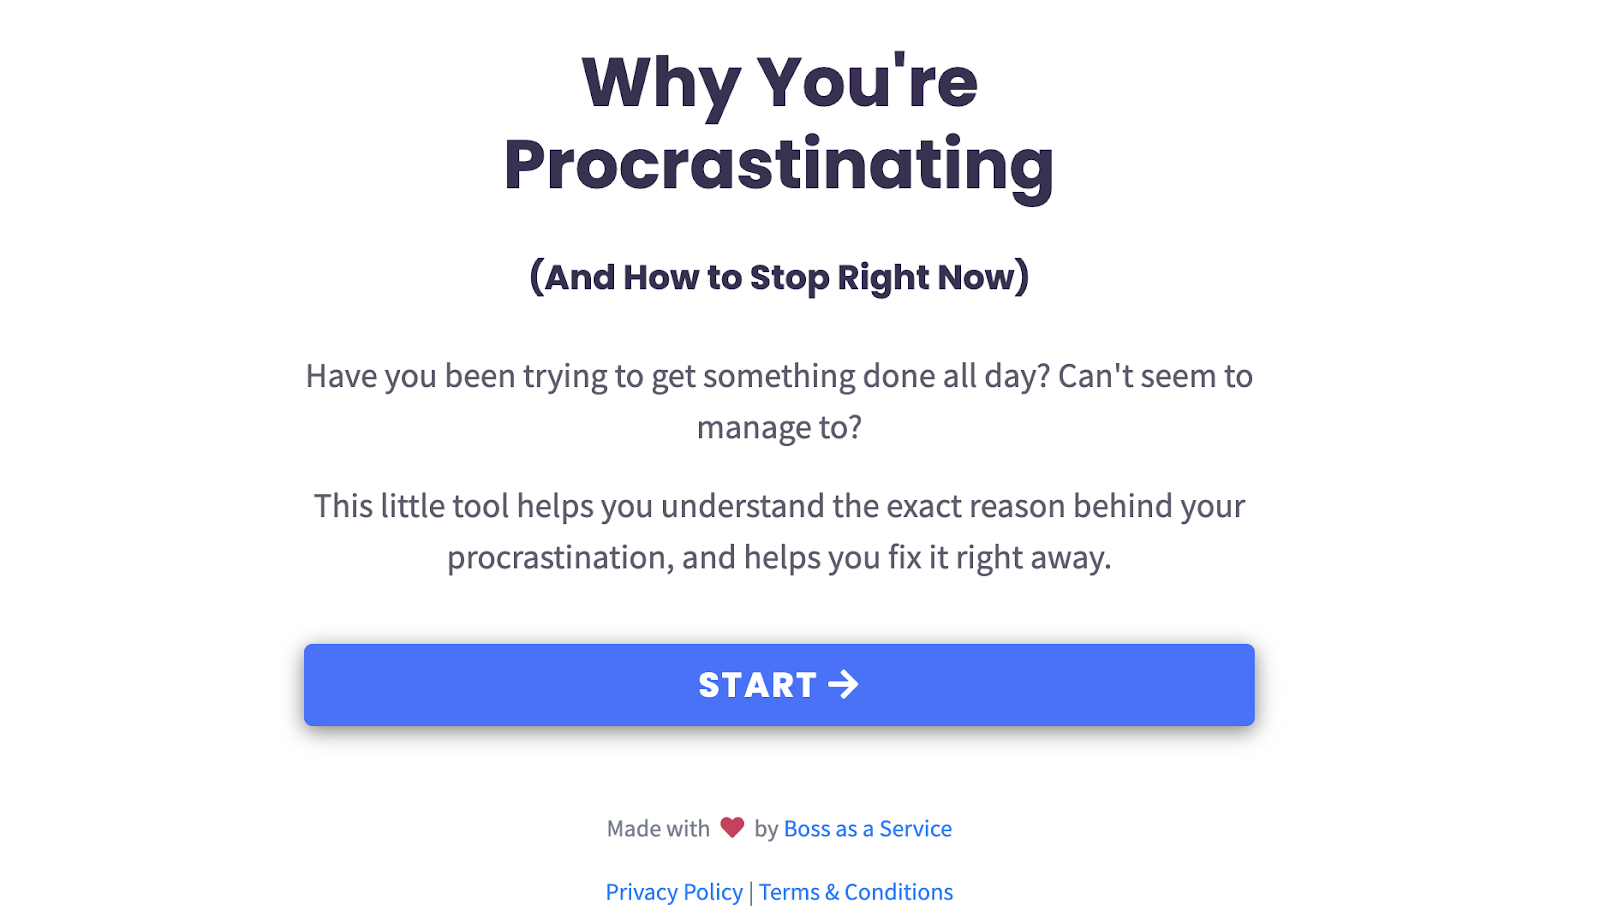 First page explaining what the "Why Do I Procrastinate" quiz is about